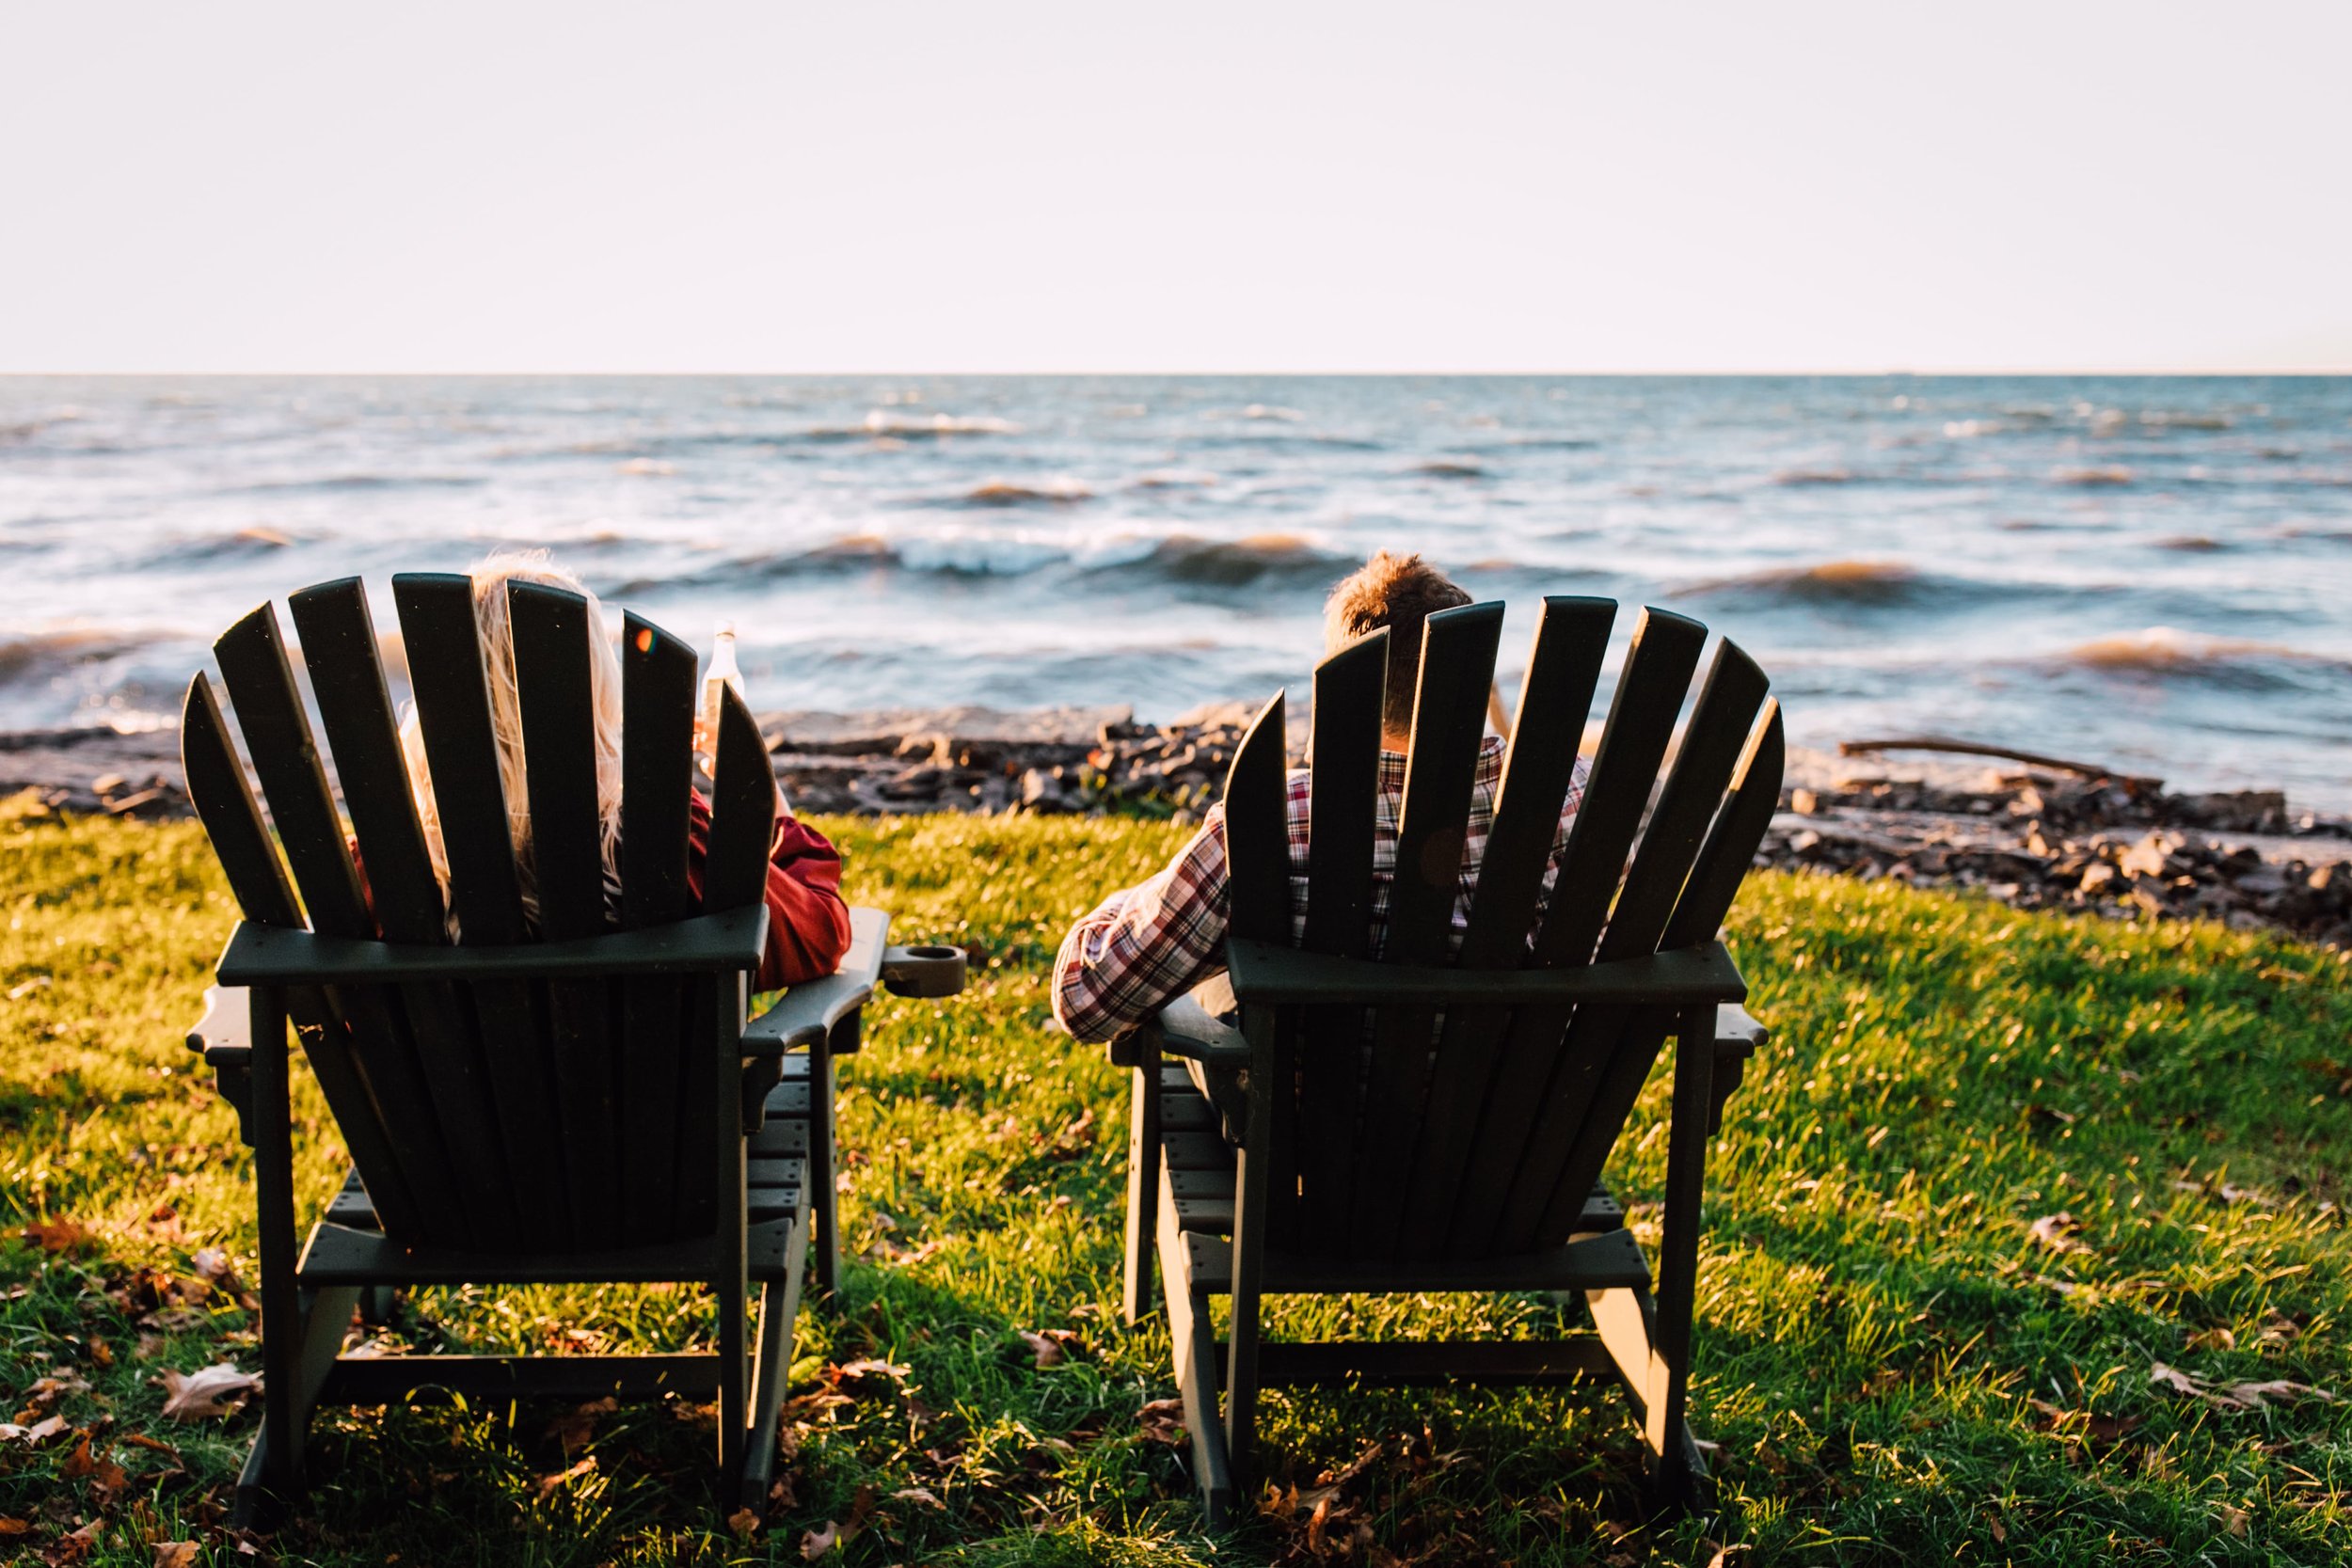  engaged couple enjoy wine coolers while sitting in adirondack chairs facing the rocky shoreline of a great lake as the sun sets on their sunset engagement photos 